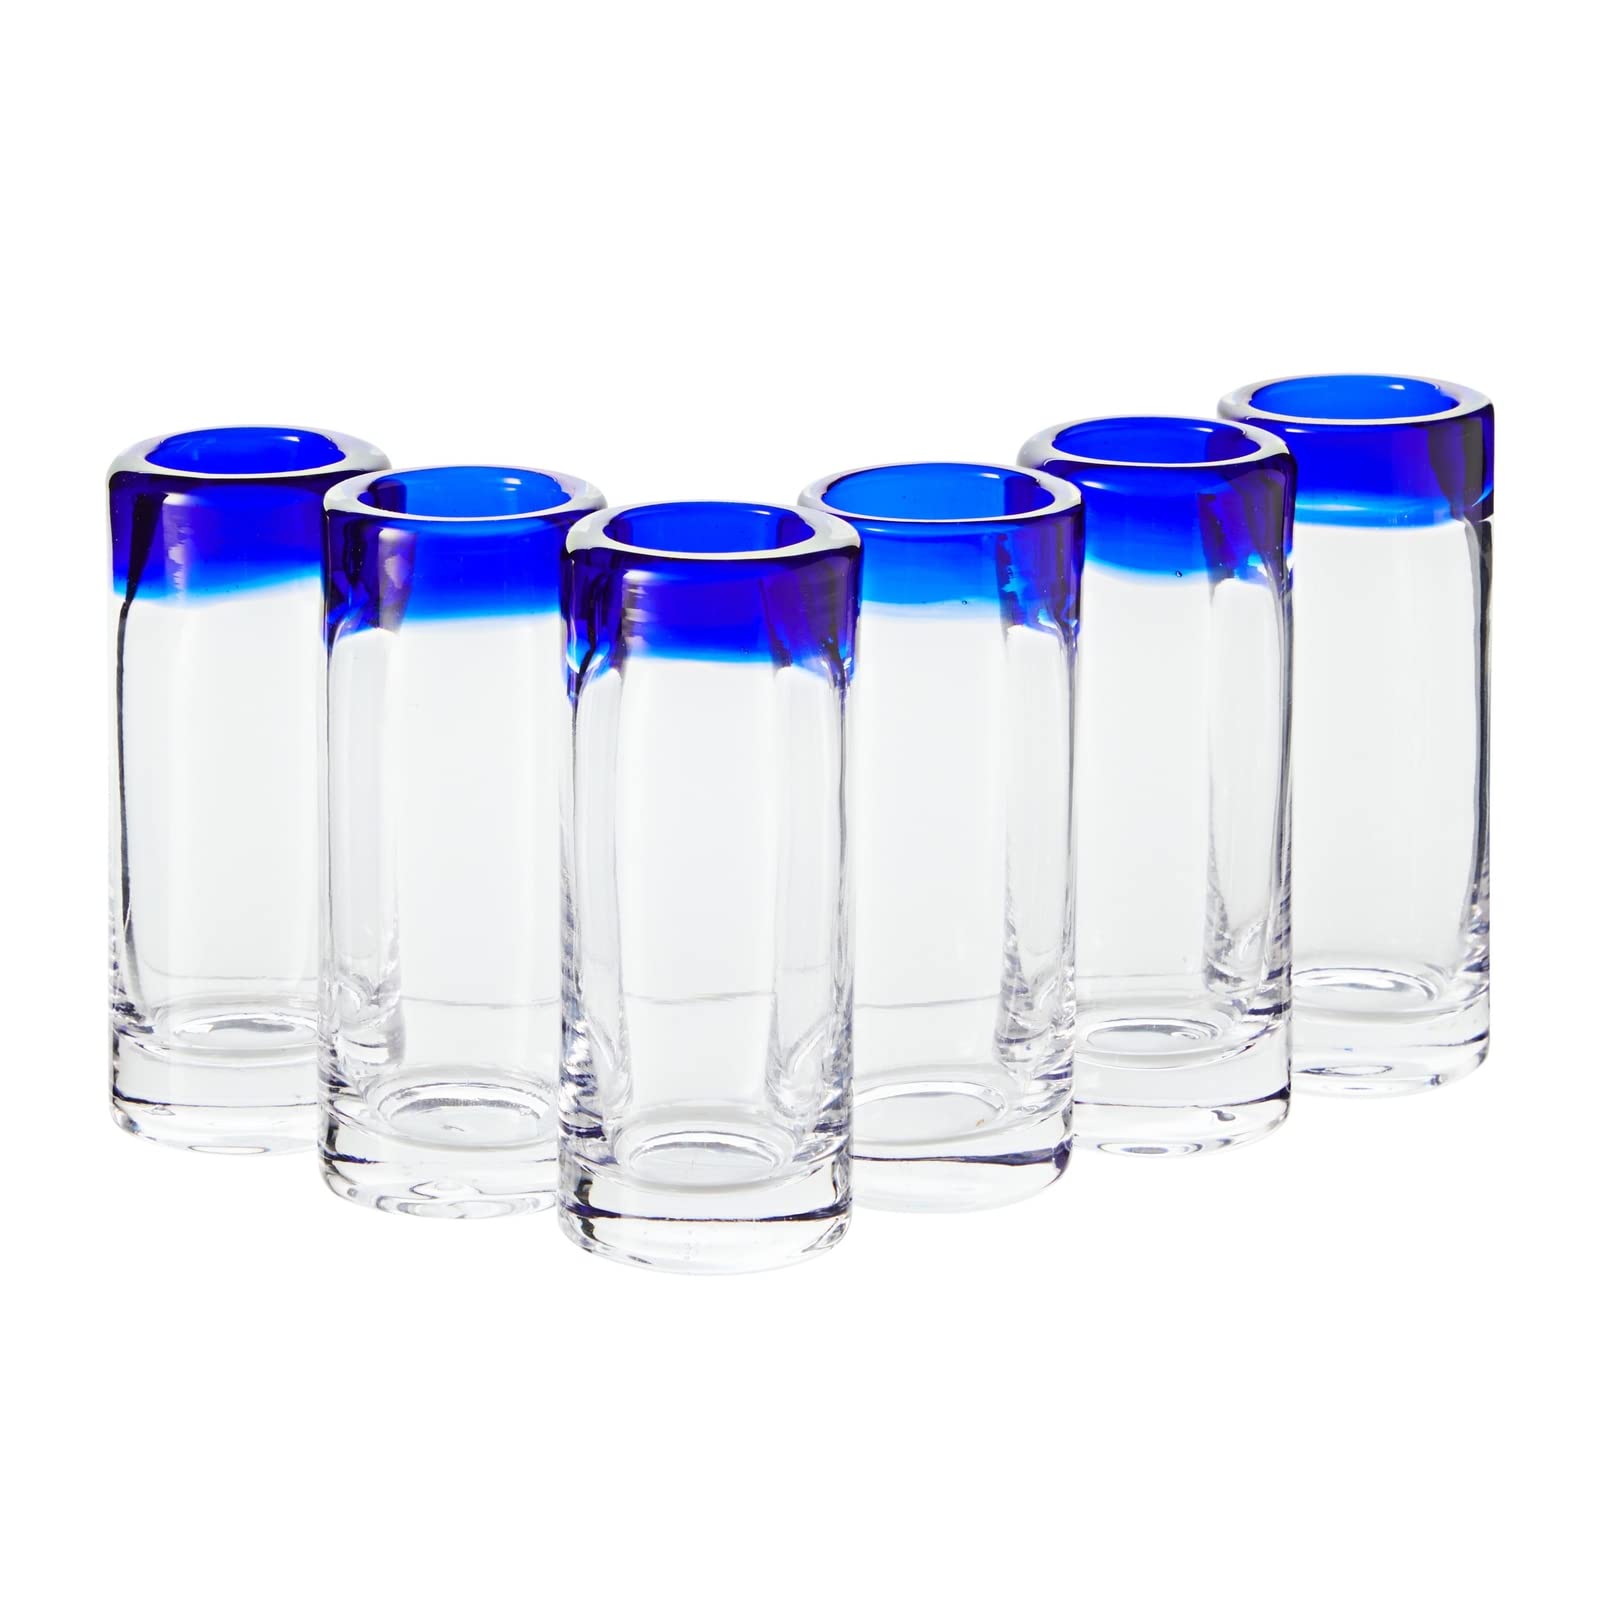 Okuna Outpost Set of 6 Hand Blown Mexican Double Shot Glasses, 2oz Cobalt Blue Rim Tequila Sipping Set